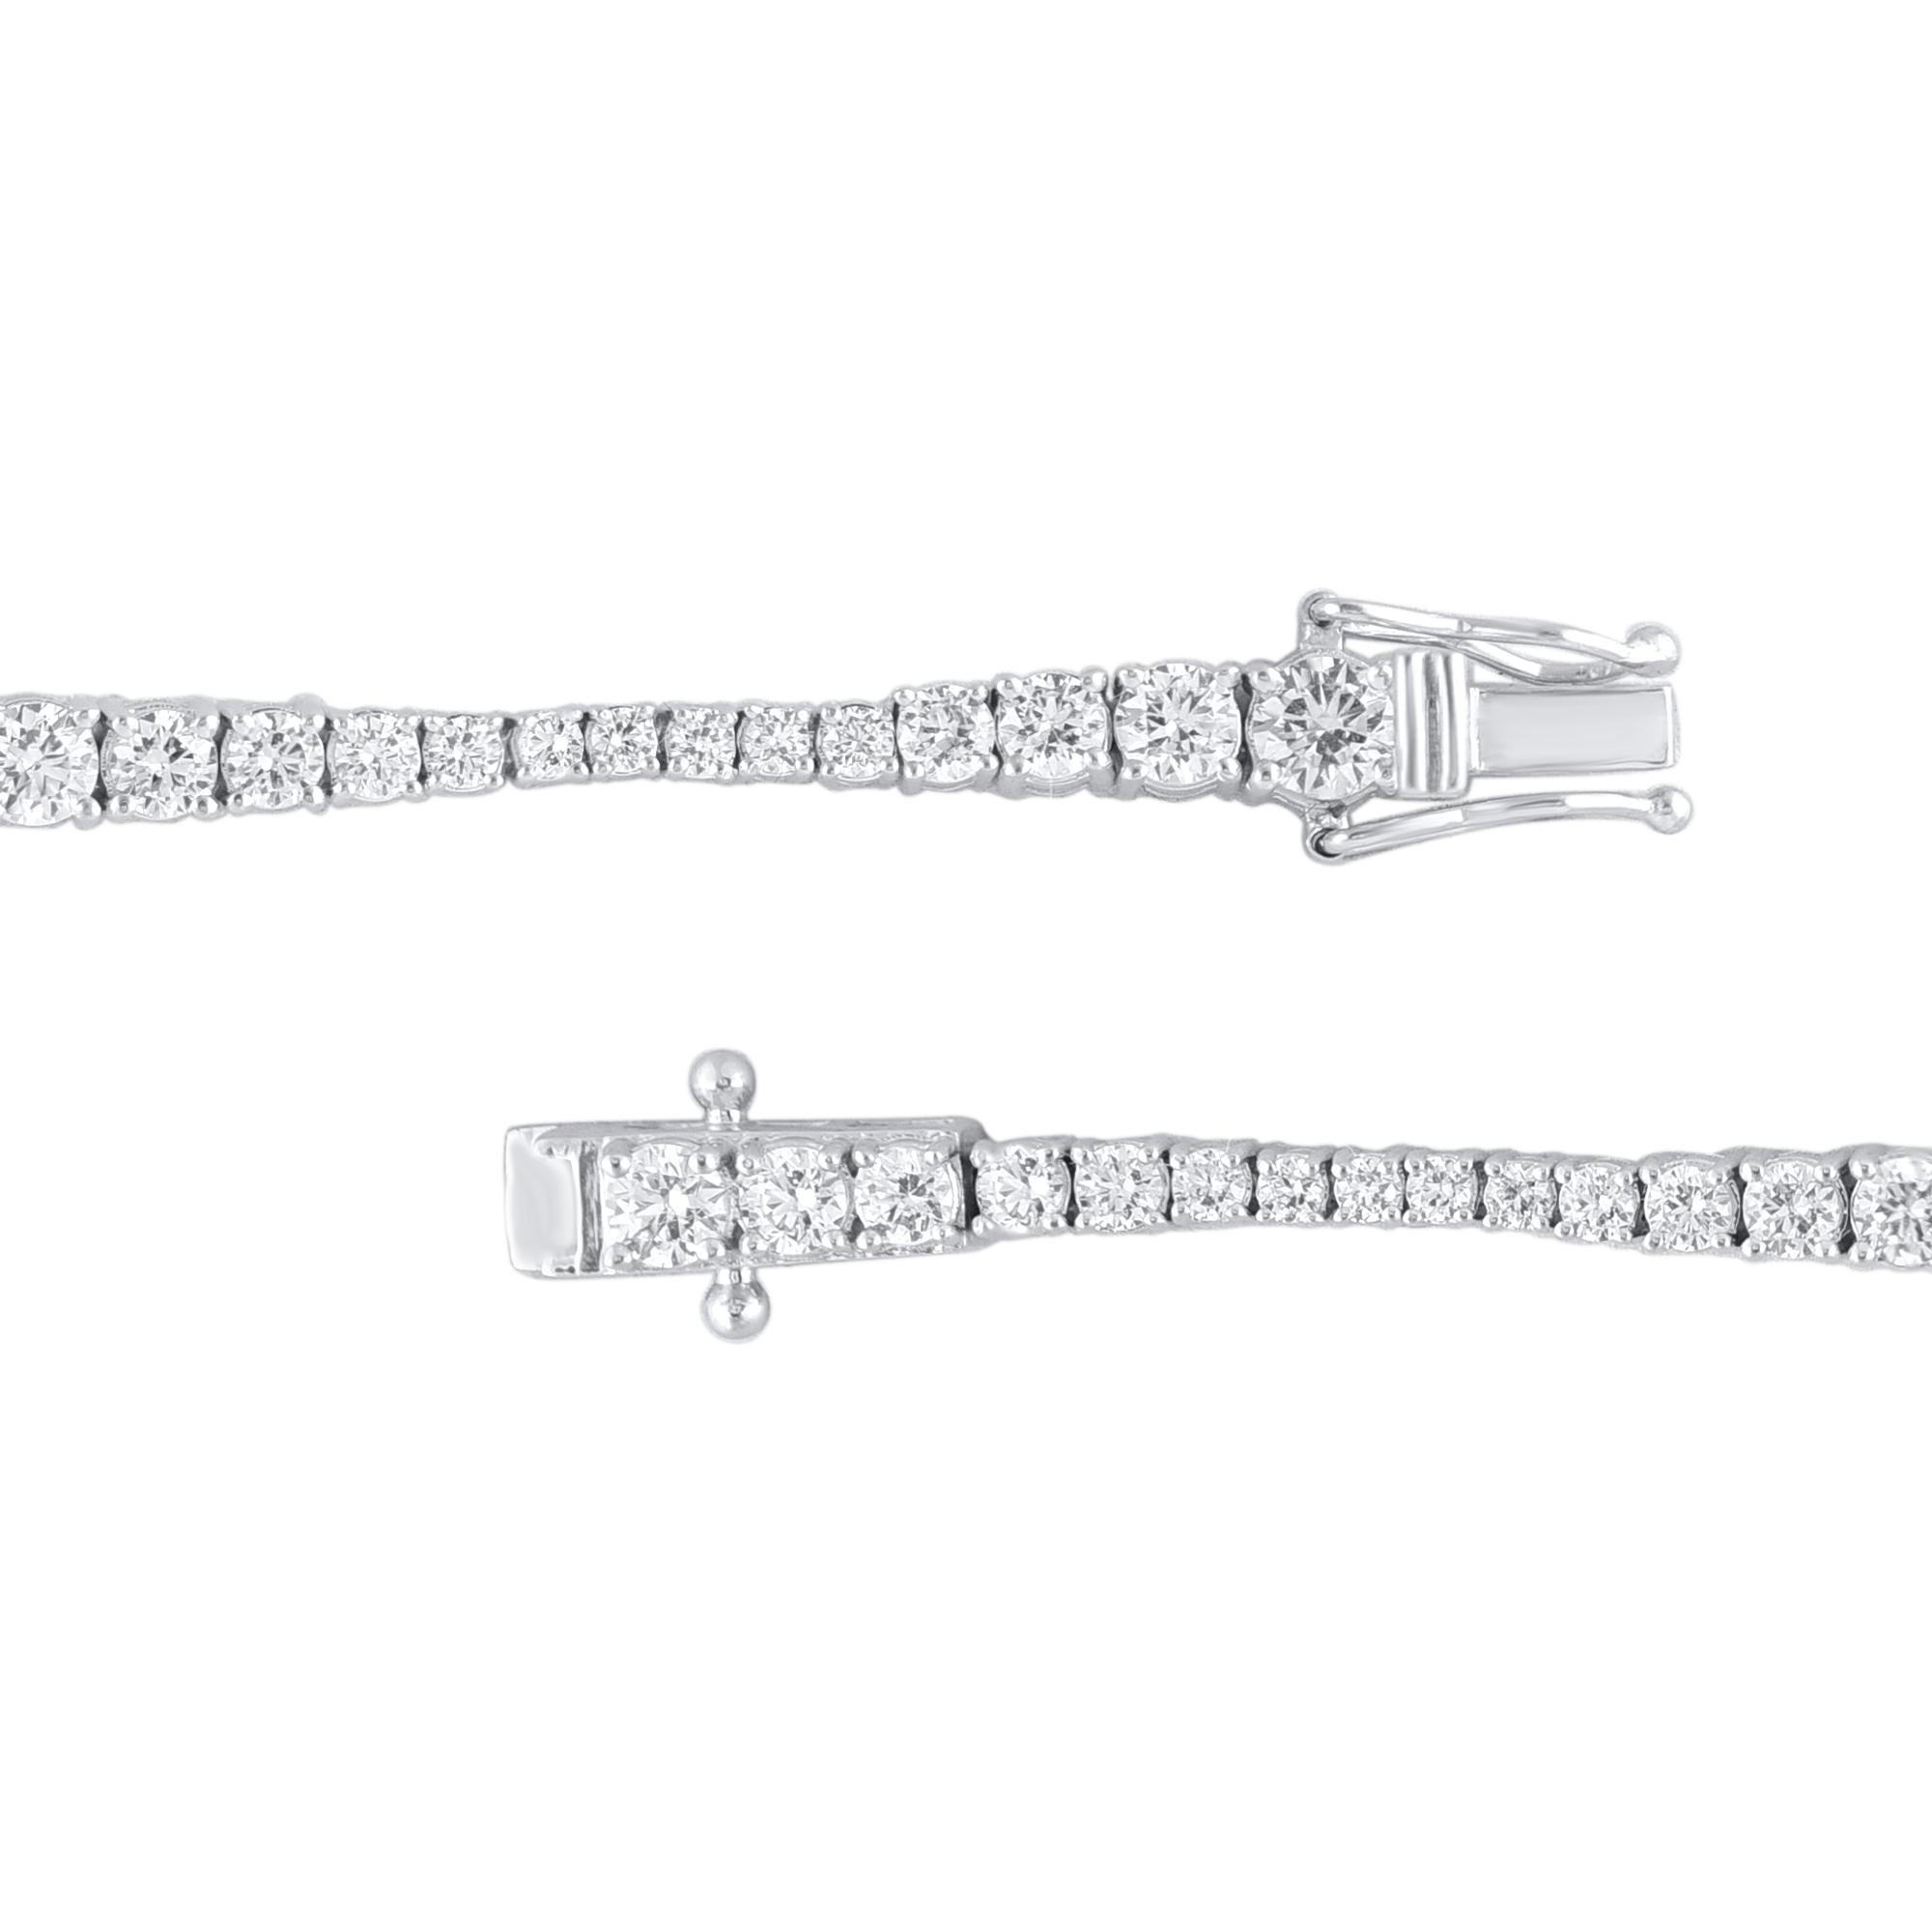 A graceful addition to her wardrobe, this diamond tennis bracelet brings the perfect touch of sparkle to her look. Beautifully hand-crafted by our inhouse experts in 14 karat white gold and embedded with 64 round brilliant cut diamond in prong